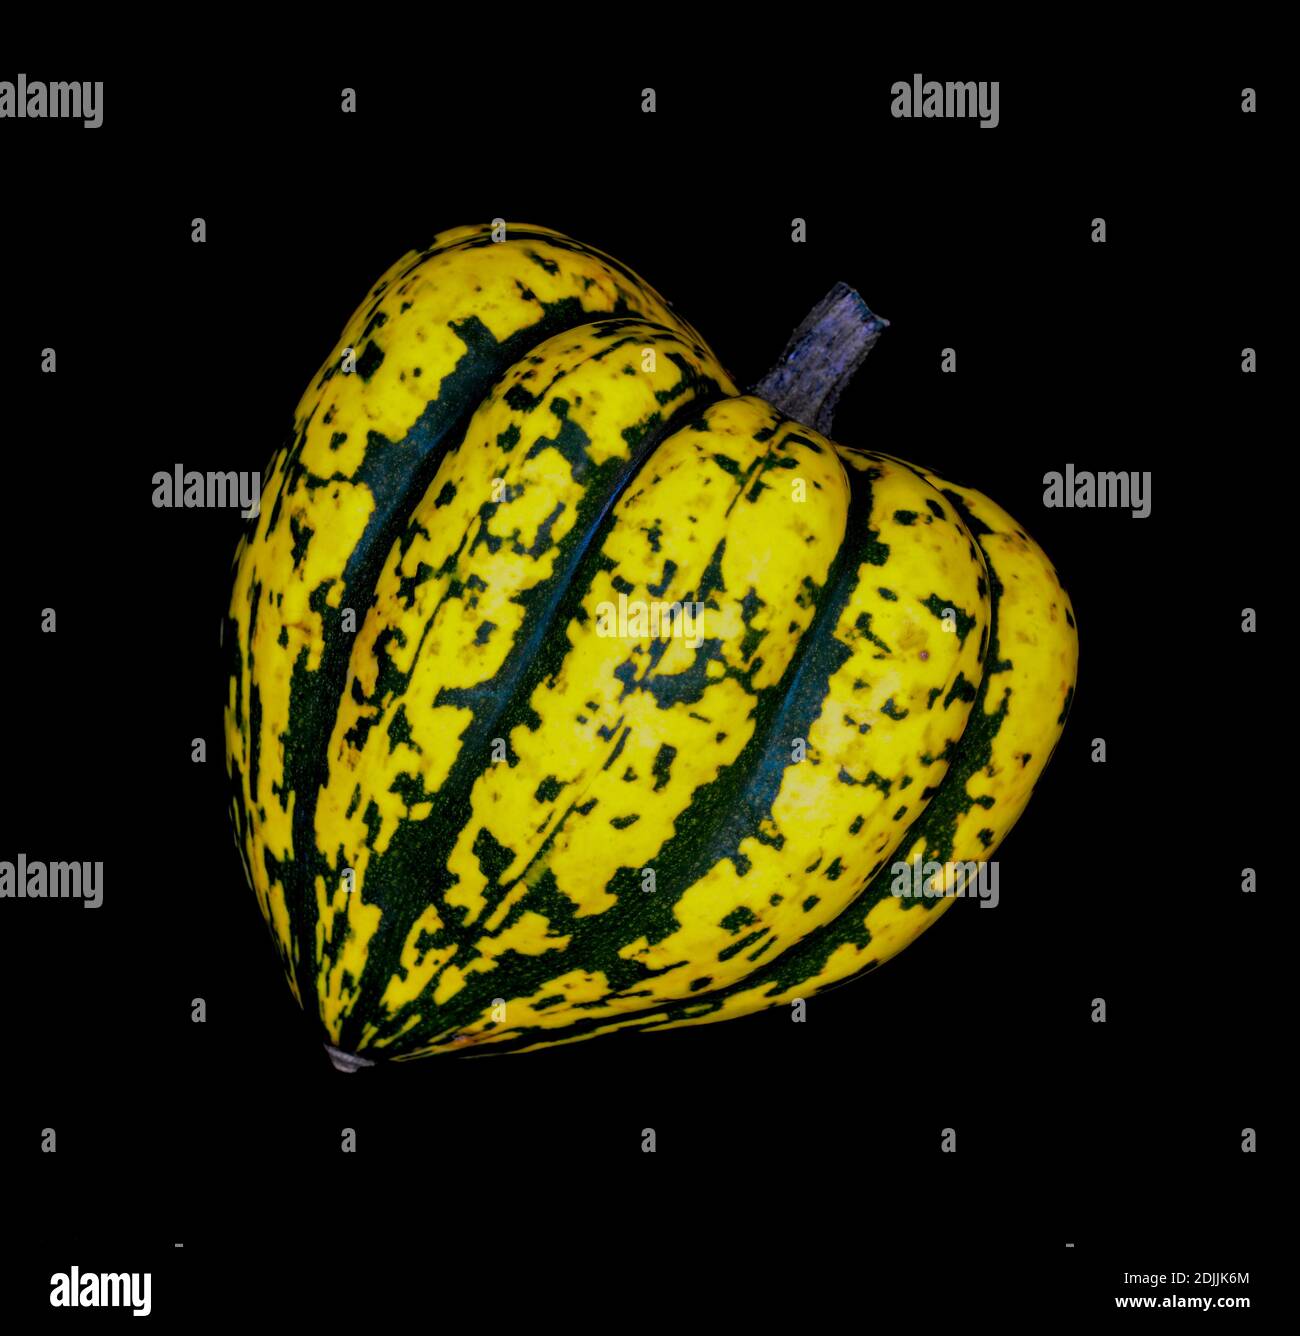 Harlequin Squash on a Black Background. Close up Studio Shot with Copy Space of an exotic, heart shaped, vegetable. Stock Photo